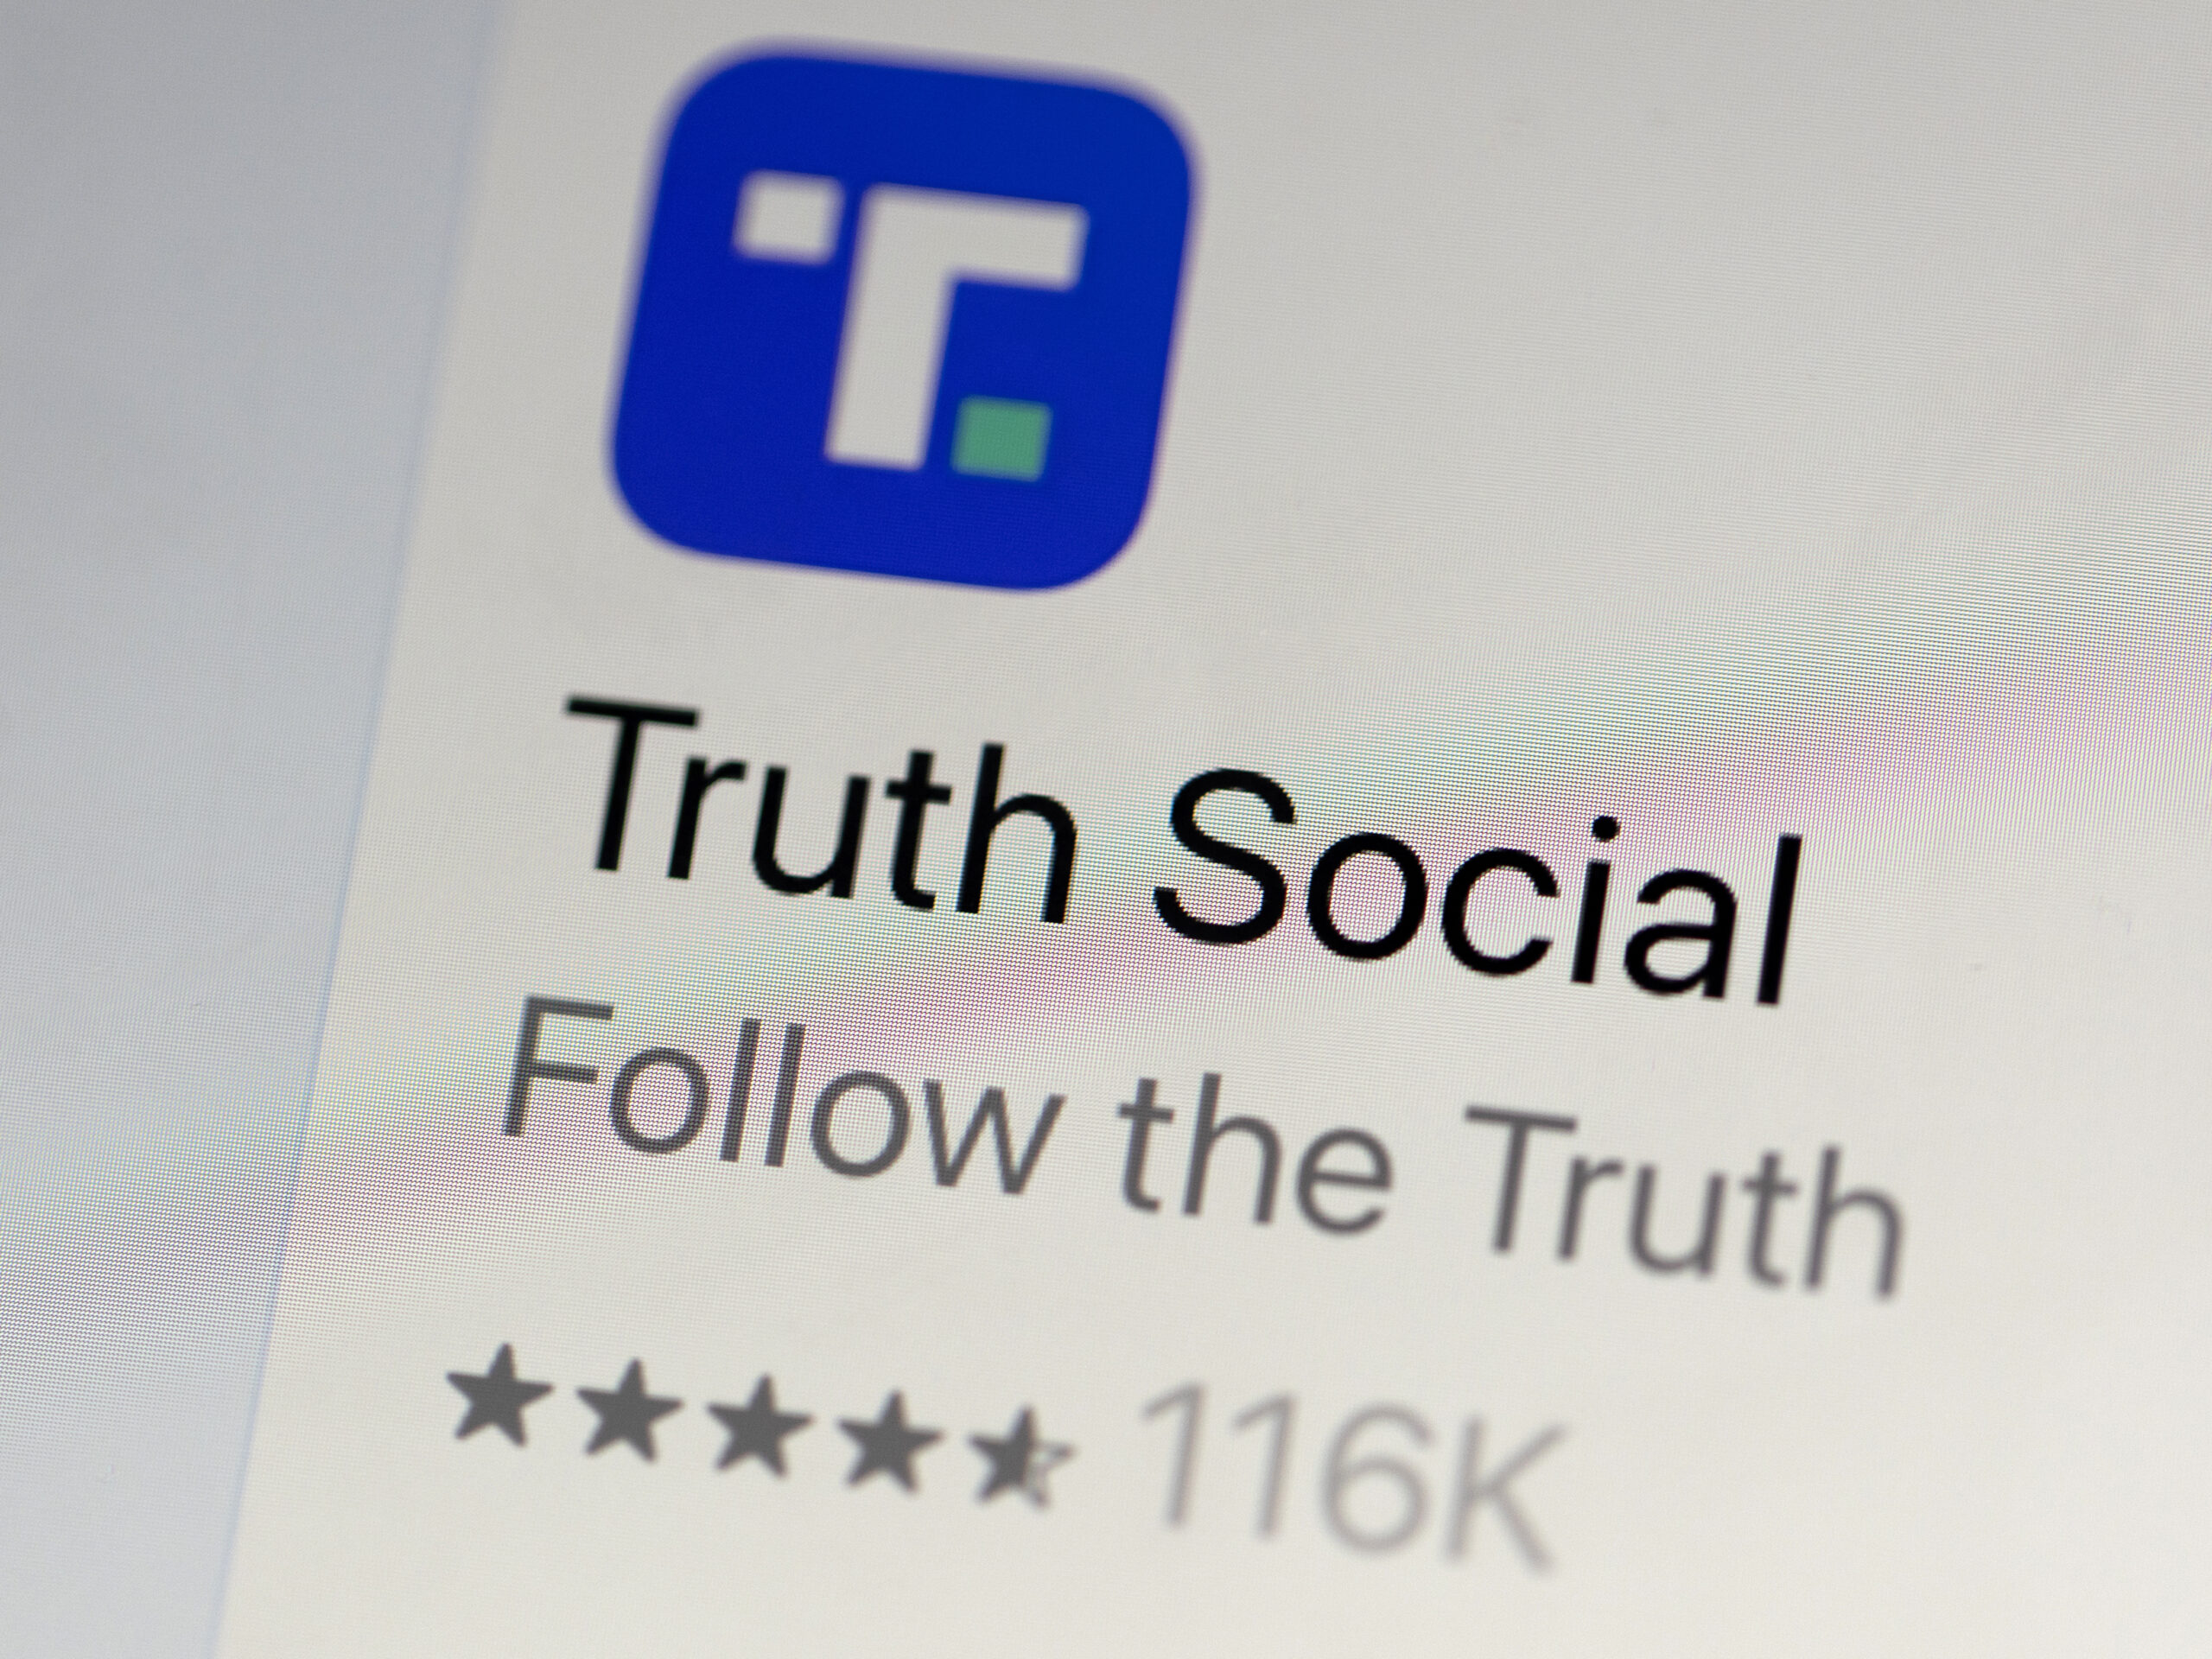 Shares of Trump Media & Technology Group, the company behind social media platform Truth Social, plunged for a second consecutive day on Monday.